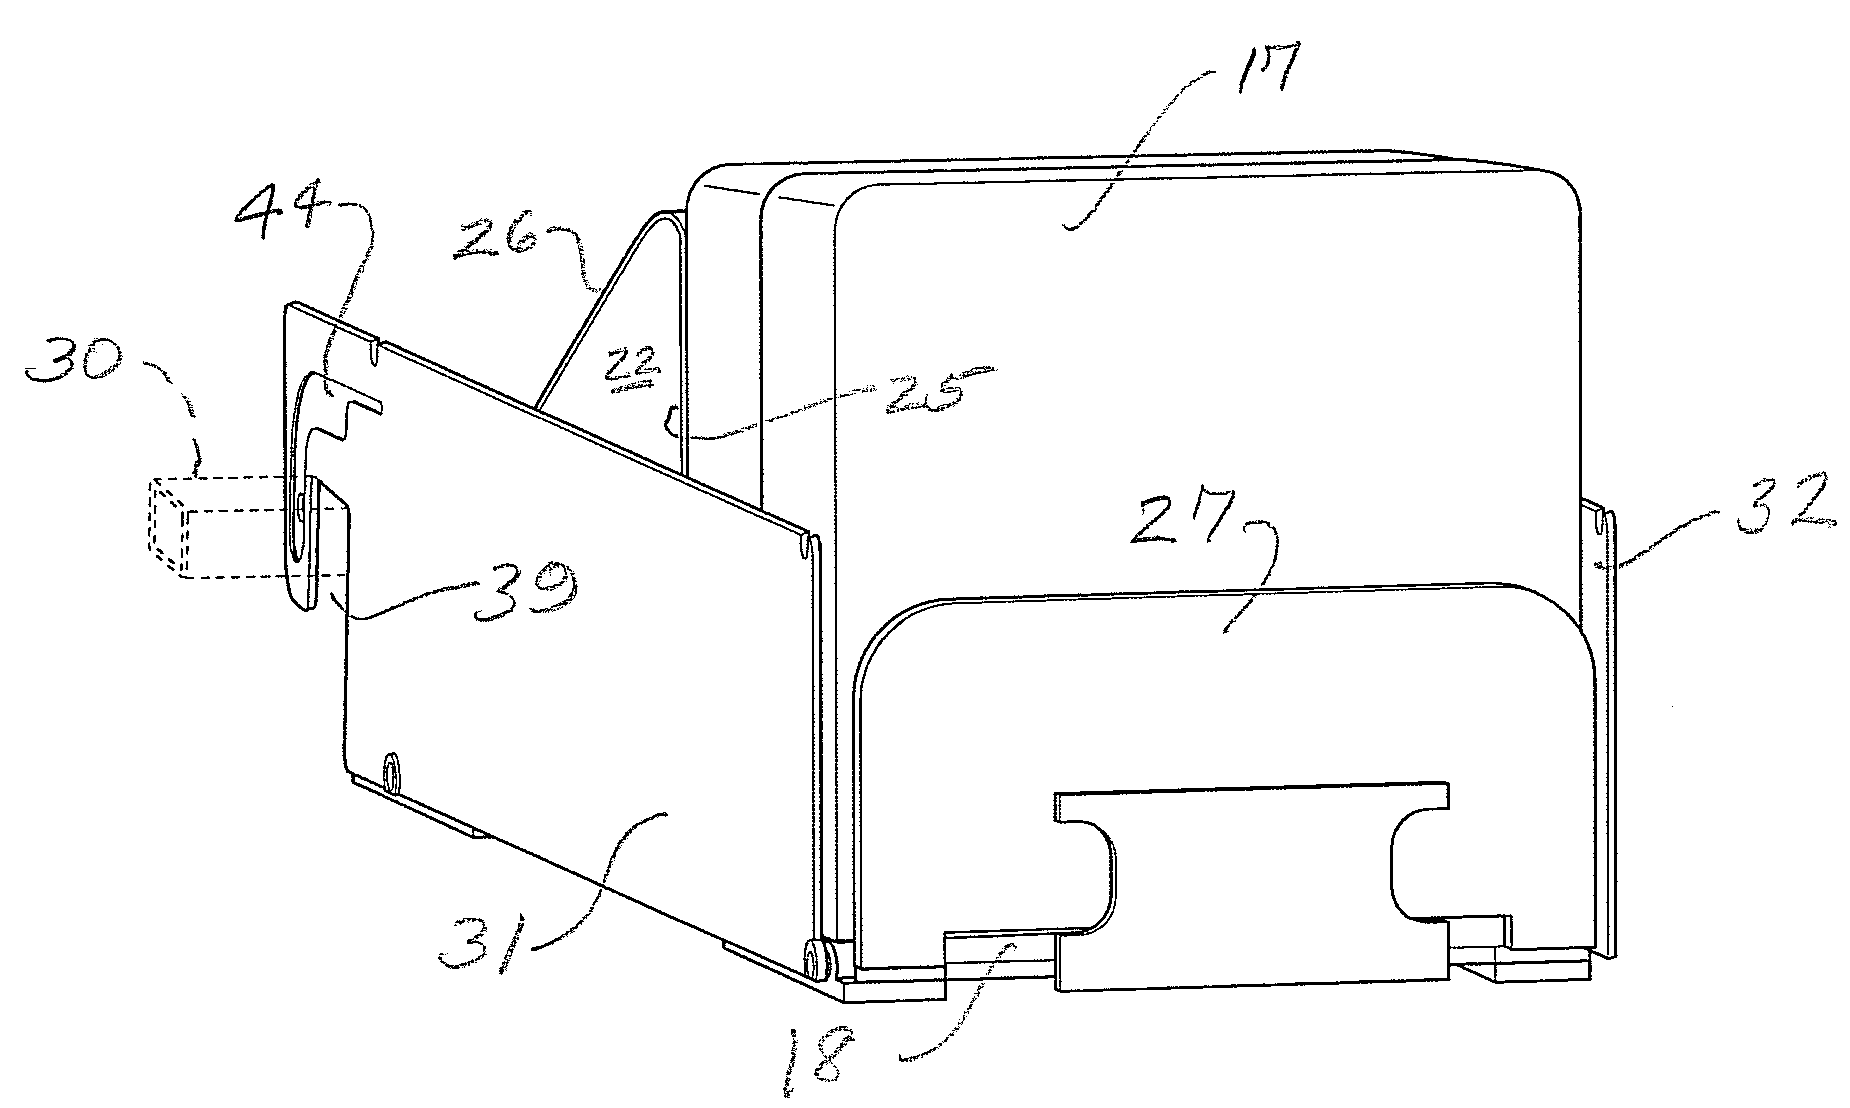 Width-adjustable product display tray with novel mounting arrangement